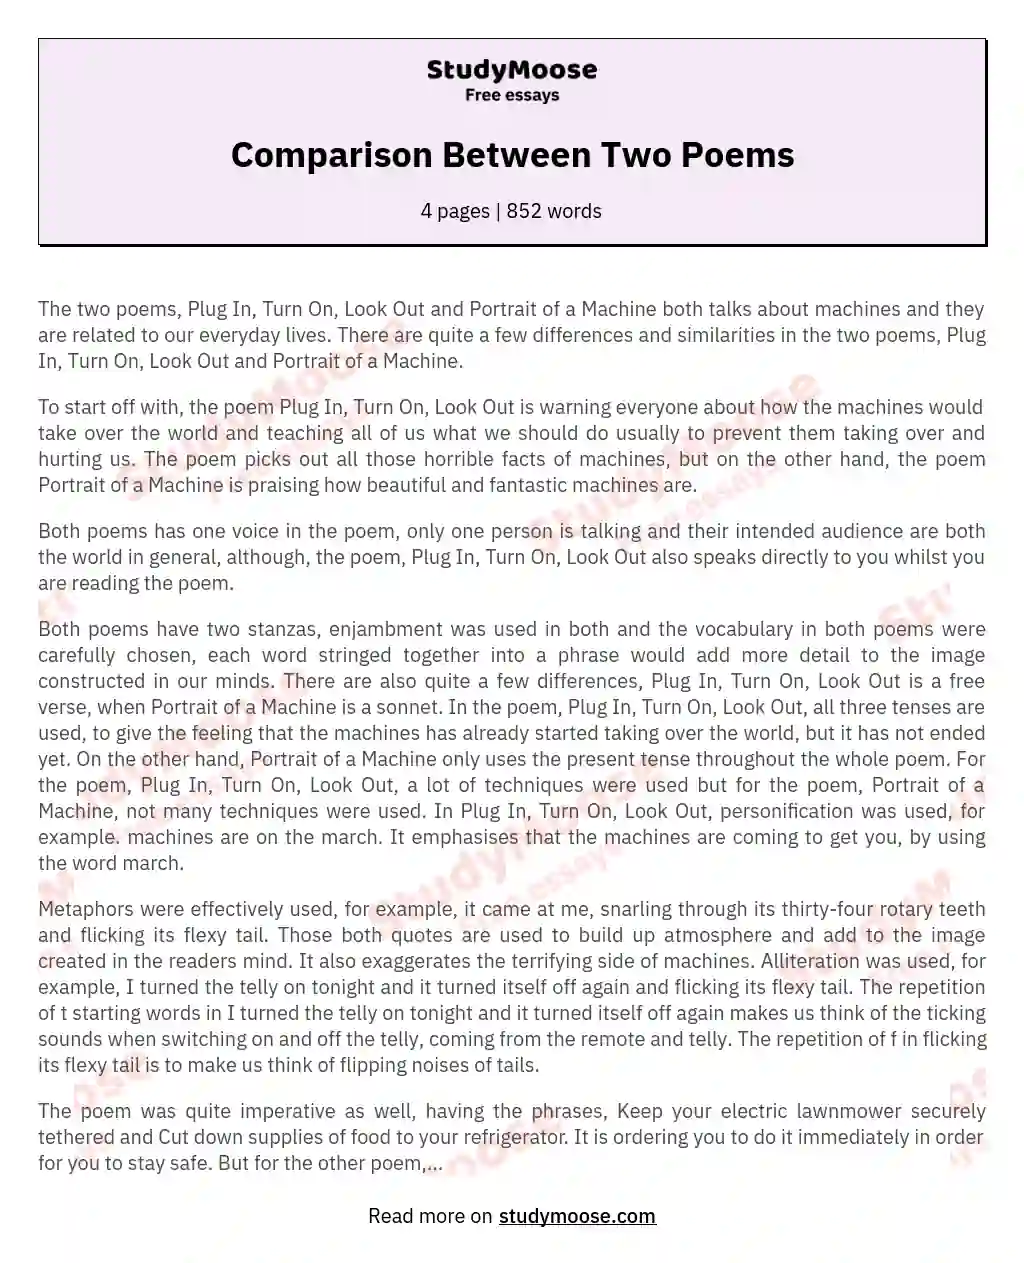 Comparison Between Two Poems essay